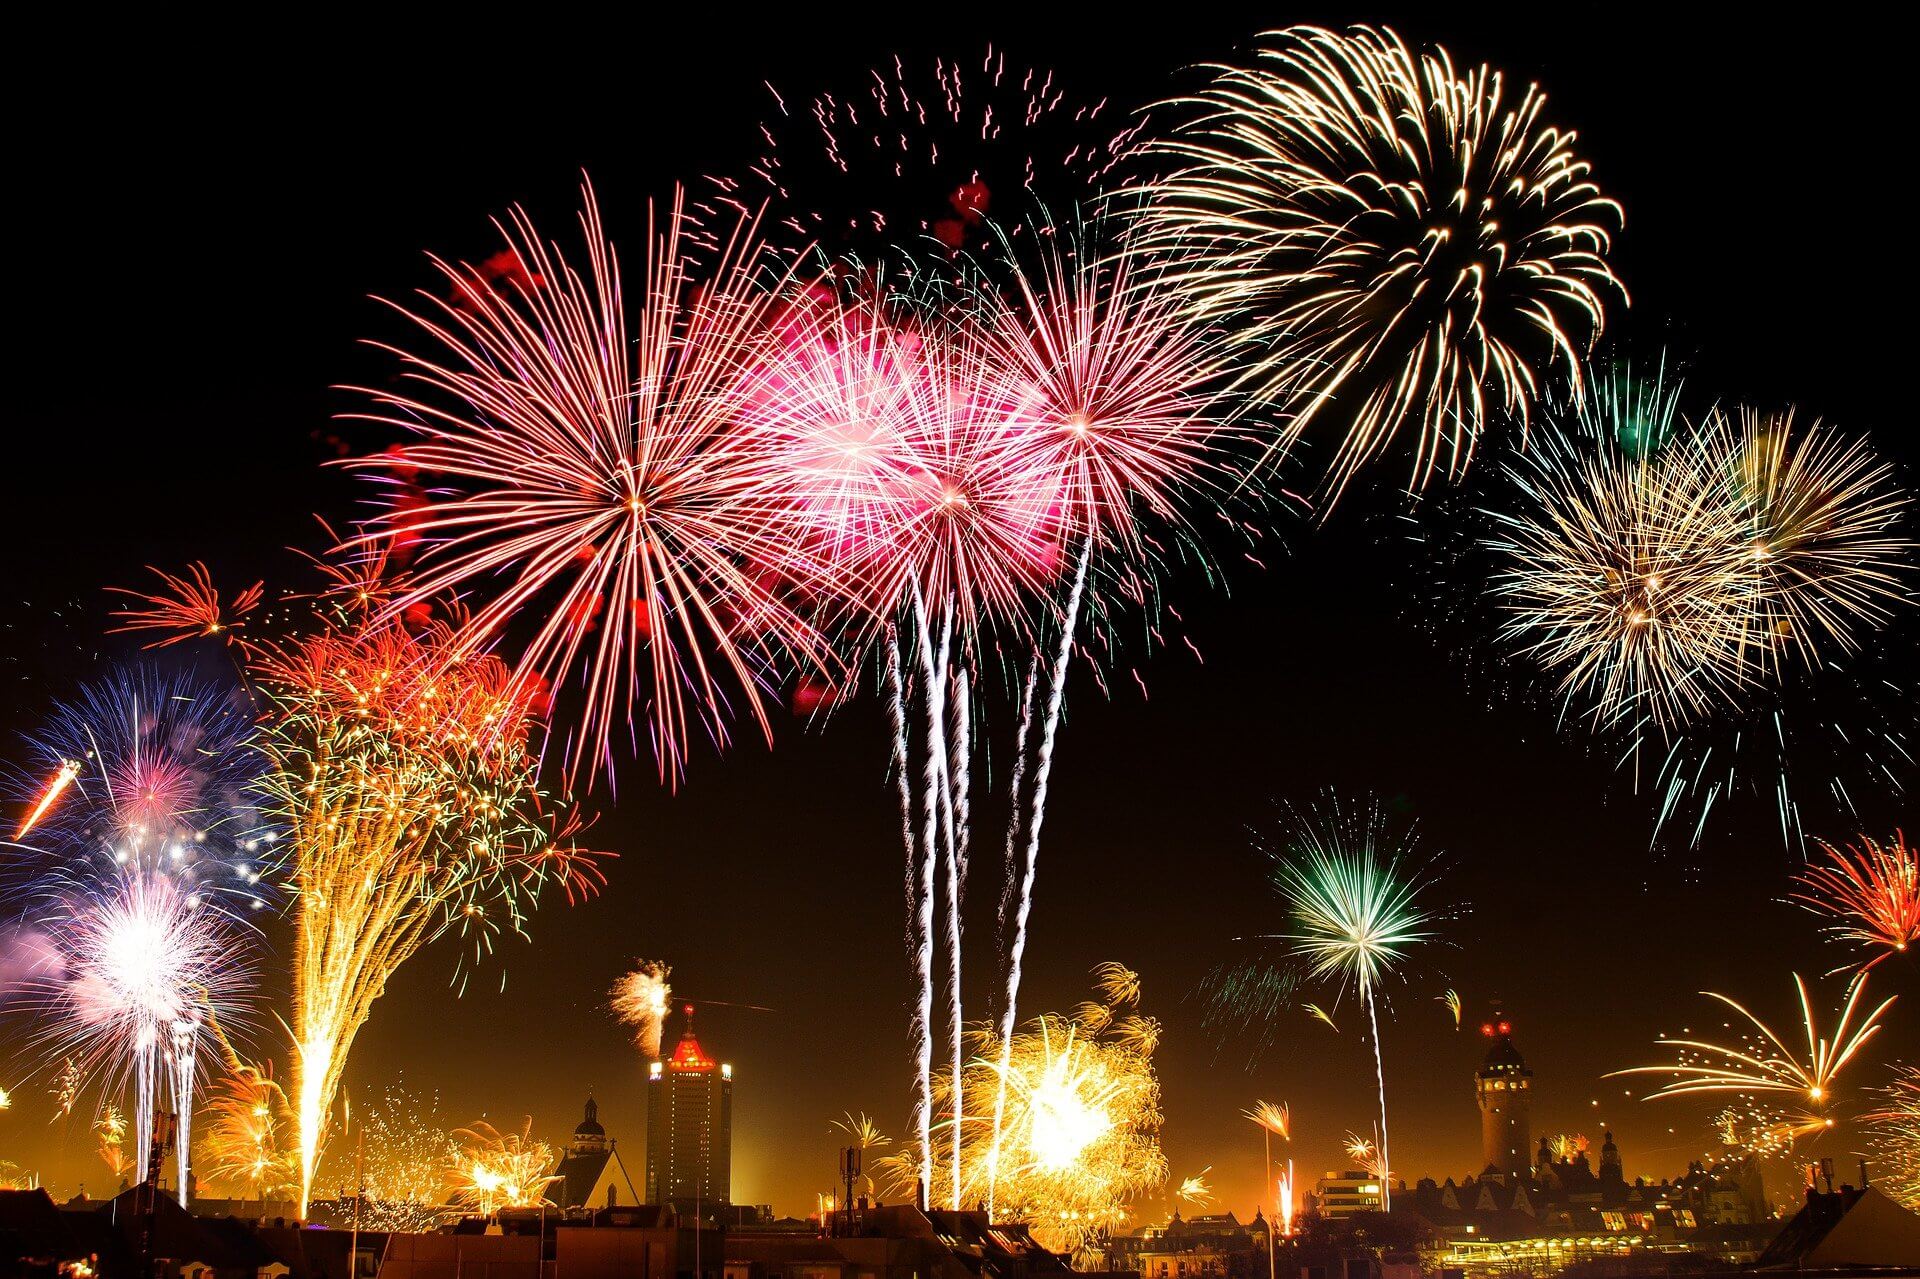 7 Tips For Staying Safe While Playing With Fireworks